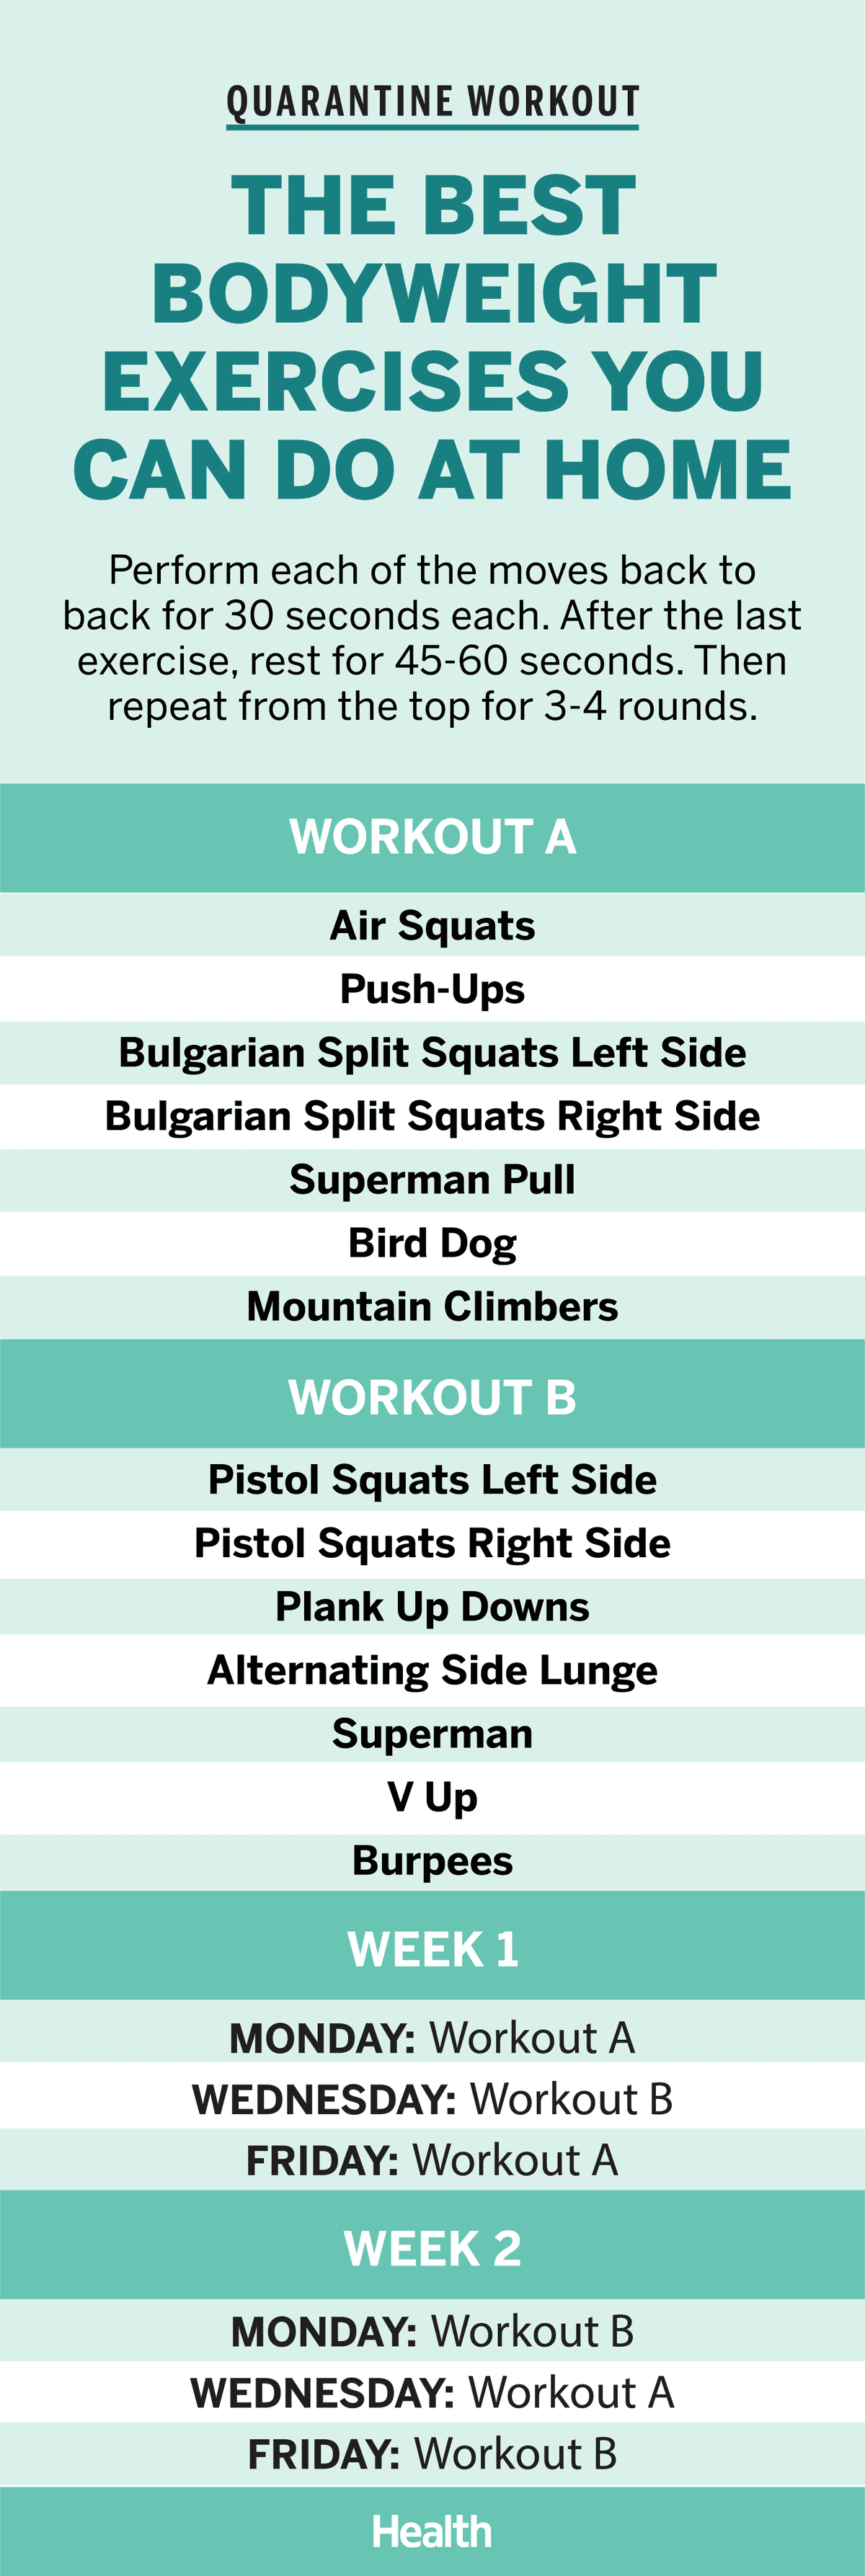 bodyweight-workout-graphic